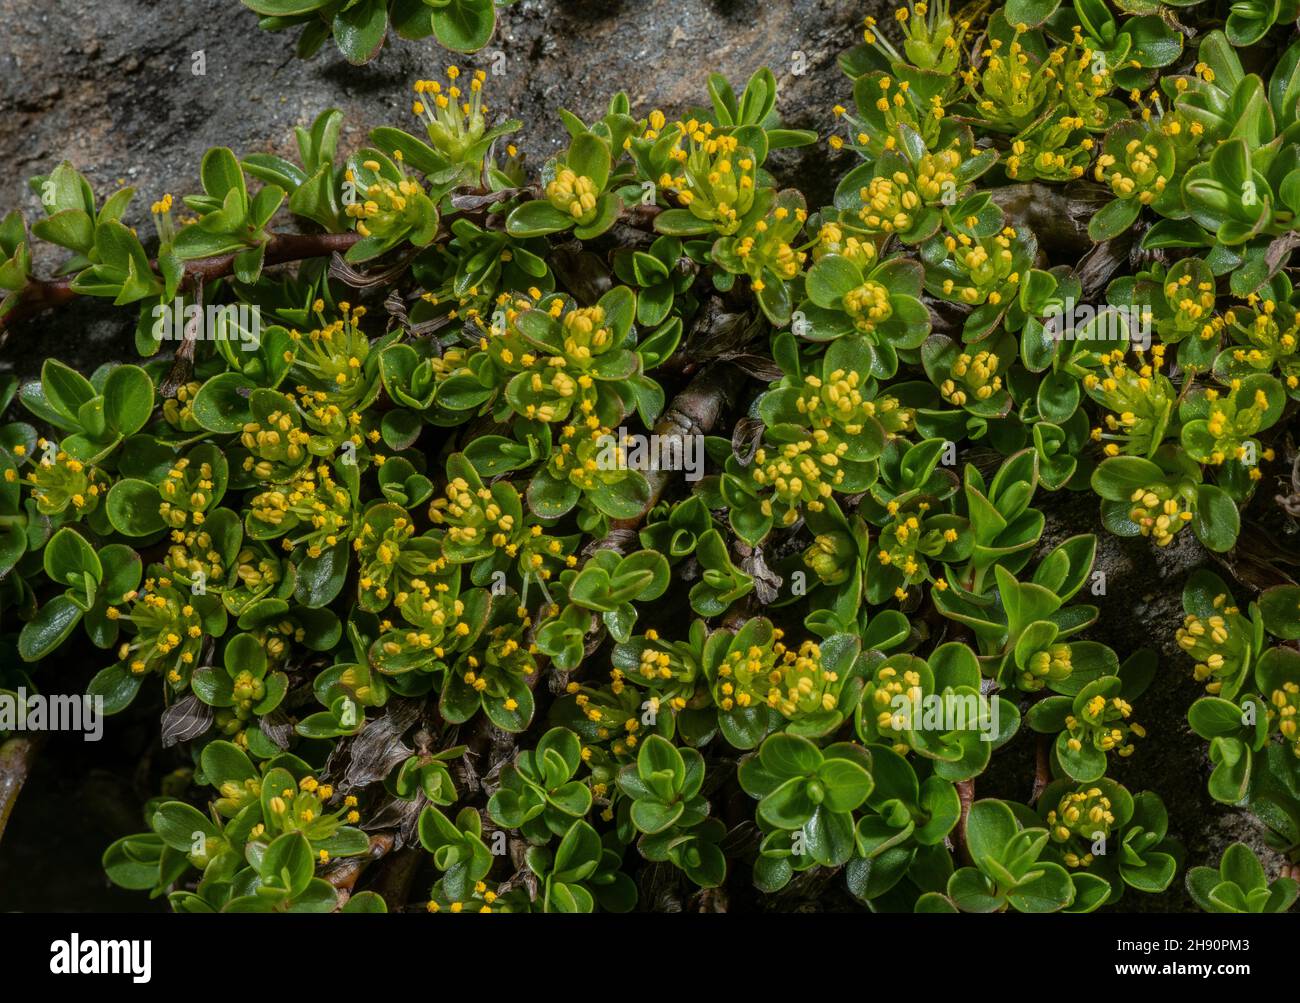 Thyme-leaved willow, Salix serpyllifolia, old plant with male catkins. High altitude, French Alps. Stock Photo